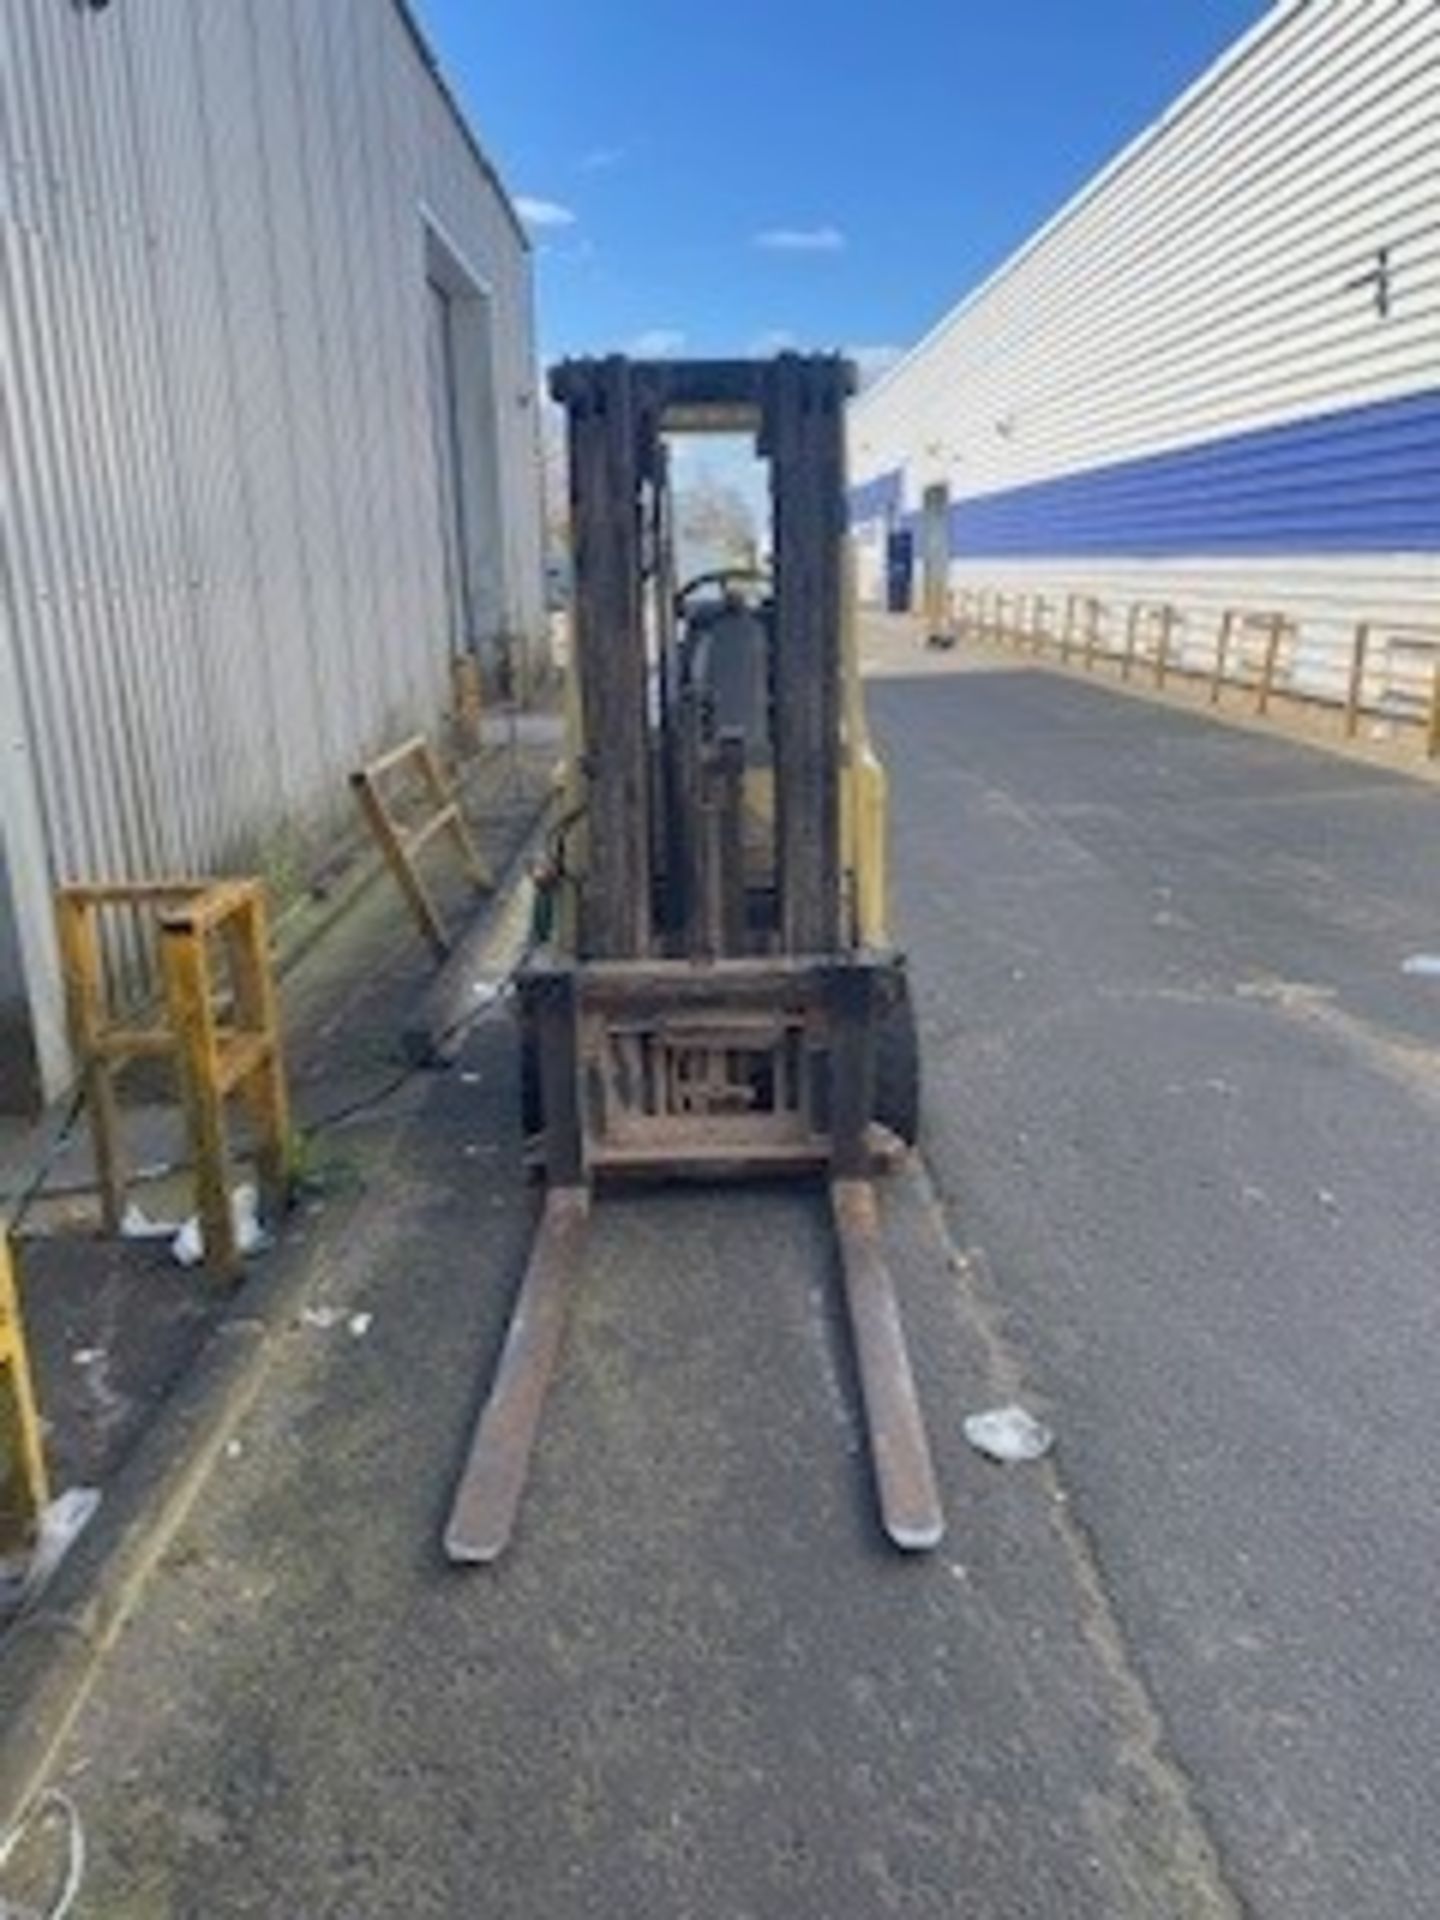 Hyster Electric Forklift Truck Model E3.00XM-847 - Image 3 of 4